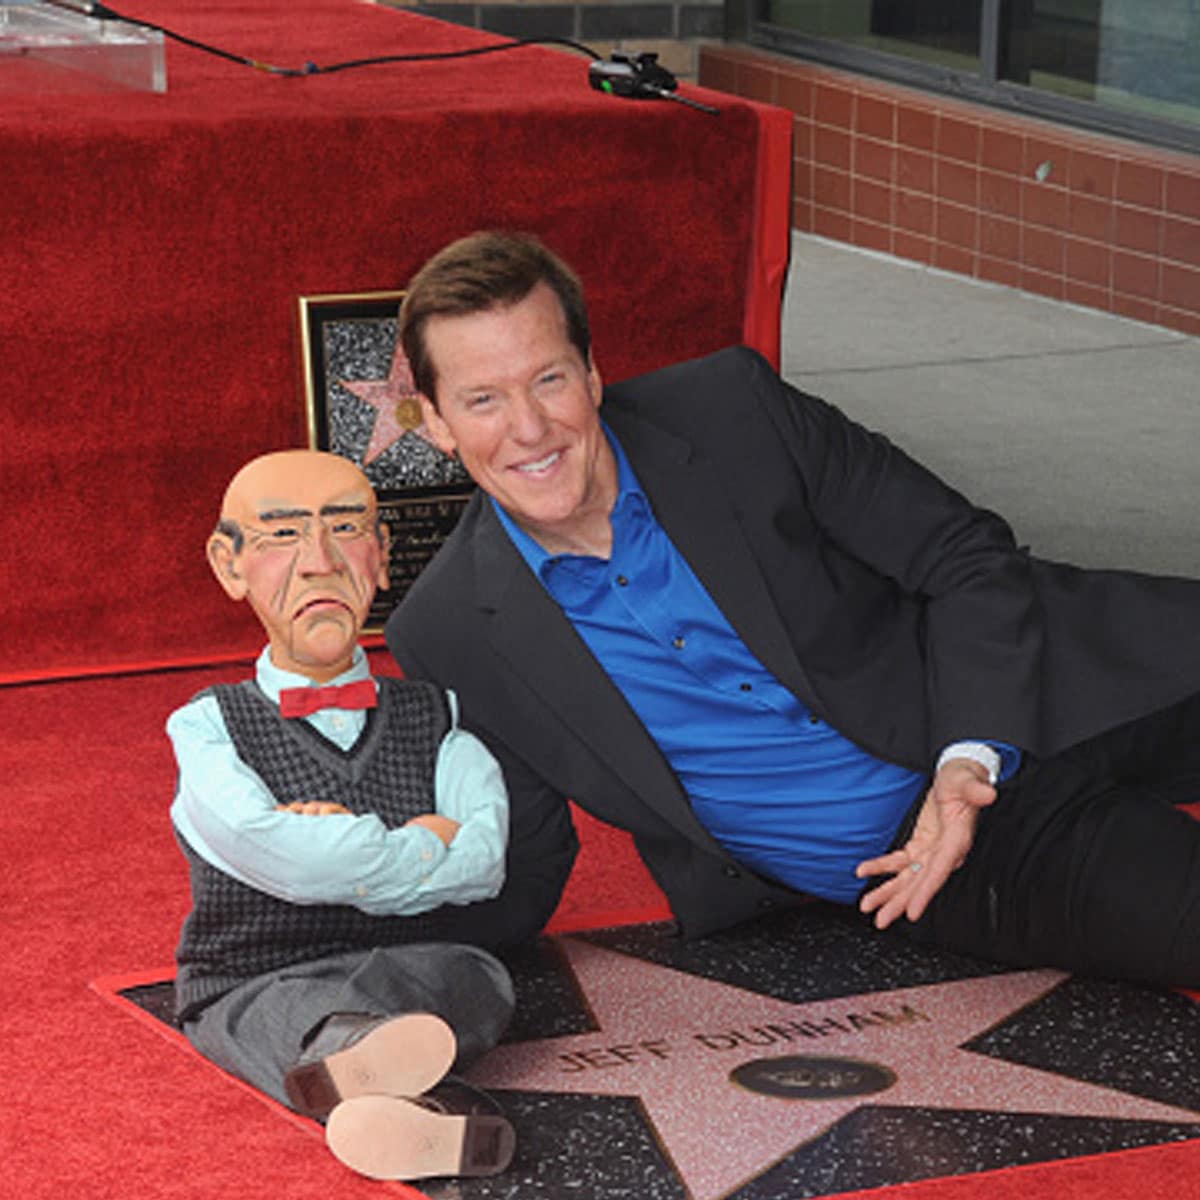 Jeff Dunham, posing with his puppet Walter, is honored with a star on The Hollywood Walk of Fame